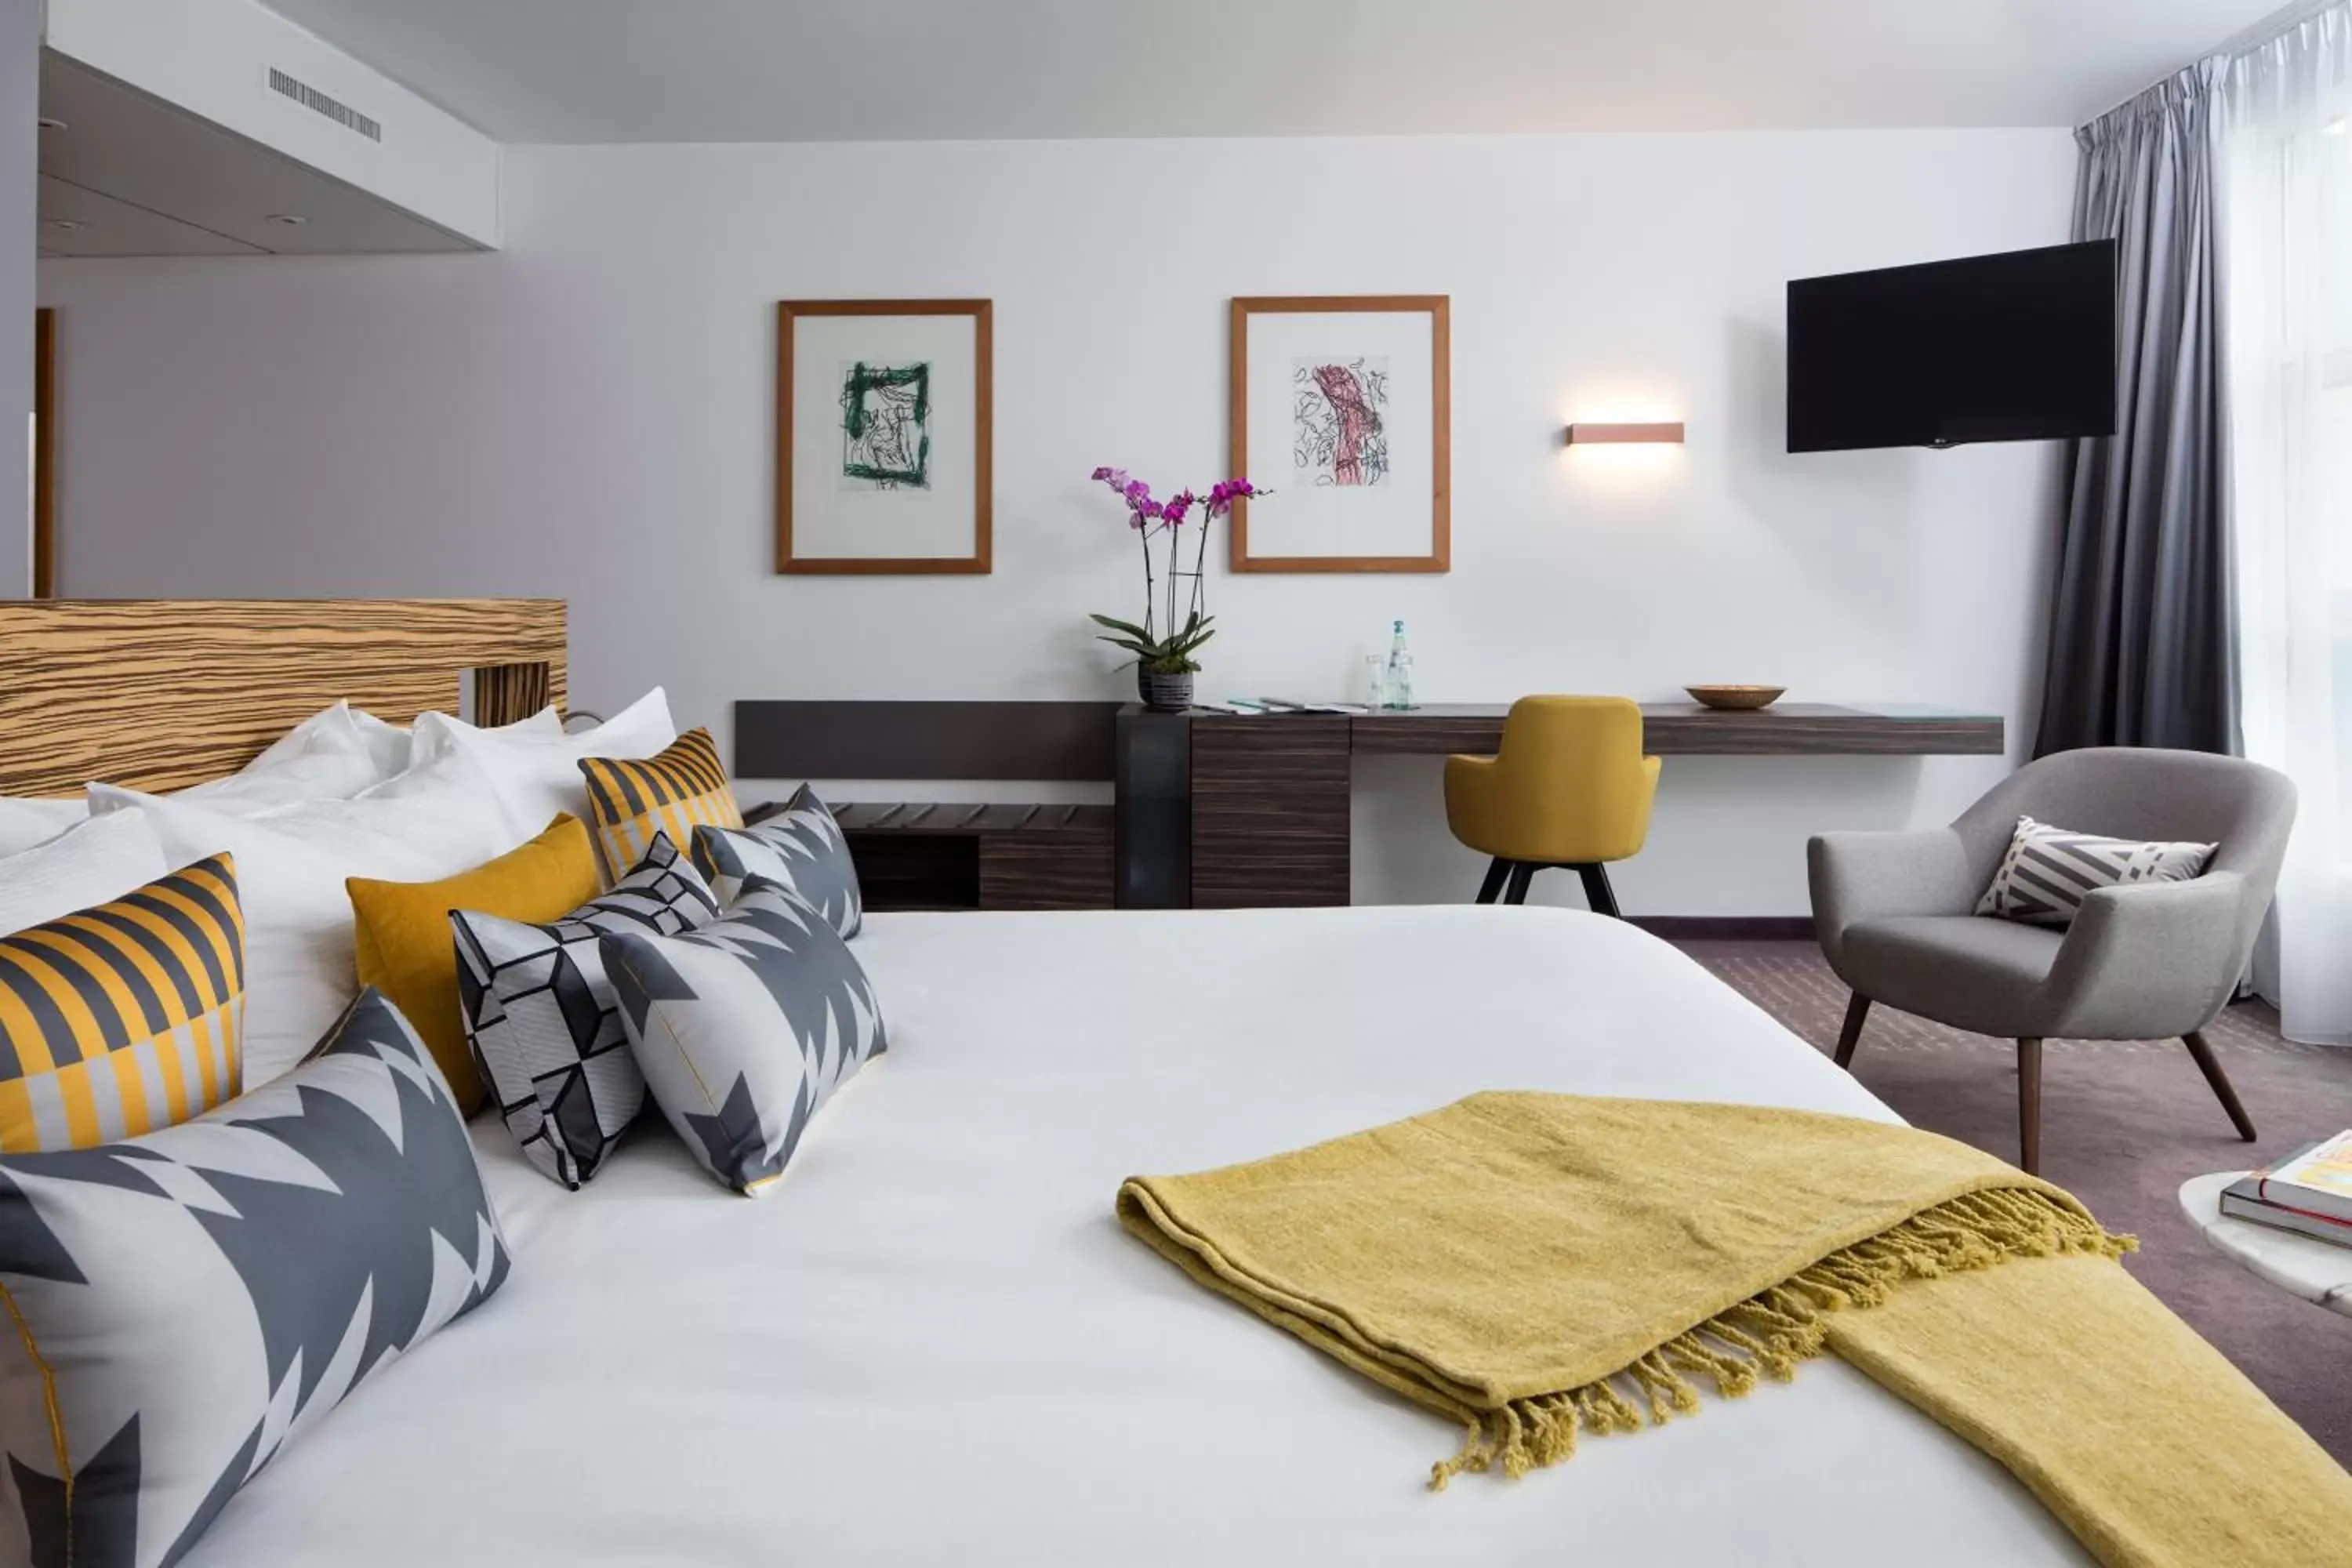 Bed, Room Photo in art'otel berlin mitte, Powered by Radisson Hotels